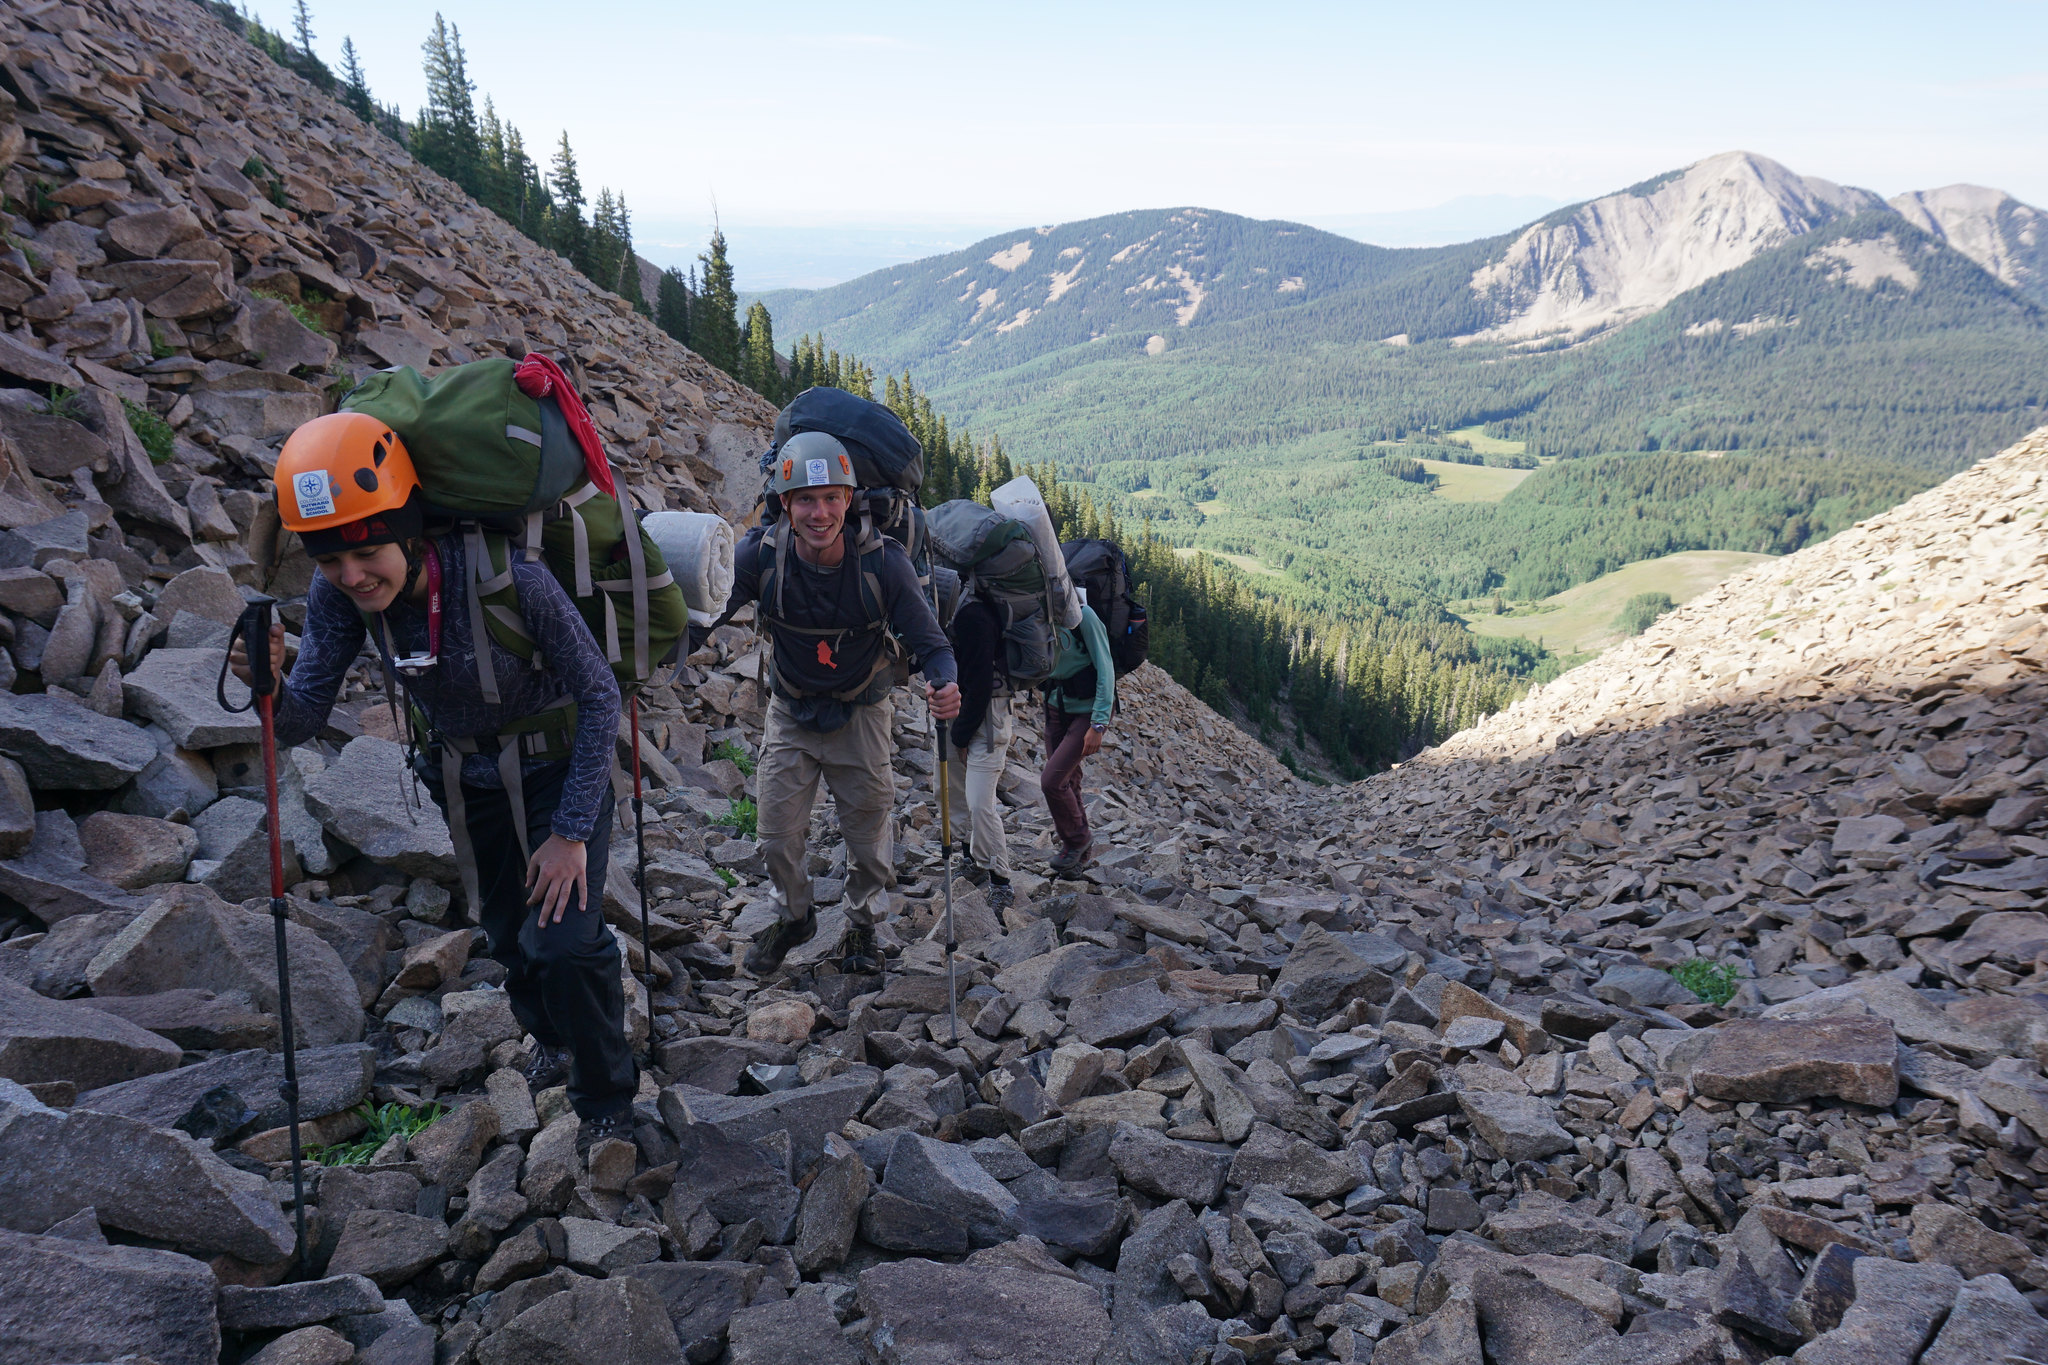 A group of students are hiking up a field of large, loose rock above treeline. They are wearing helmets and using trekking poles while carrying backpacks.